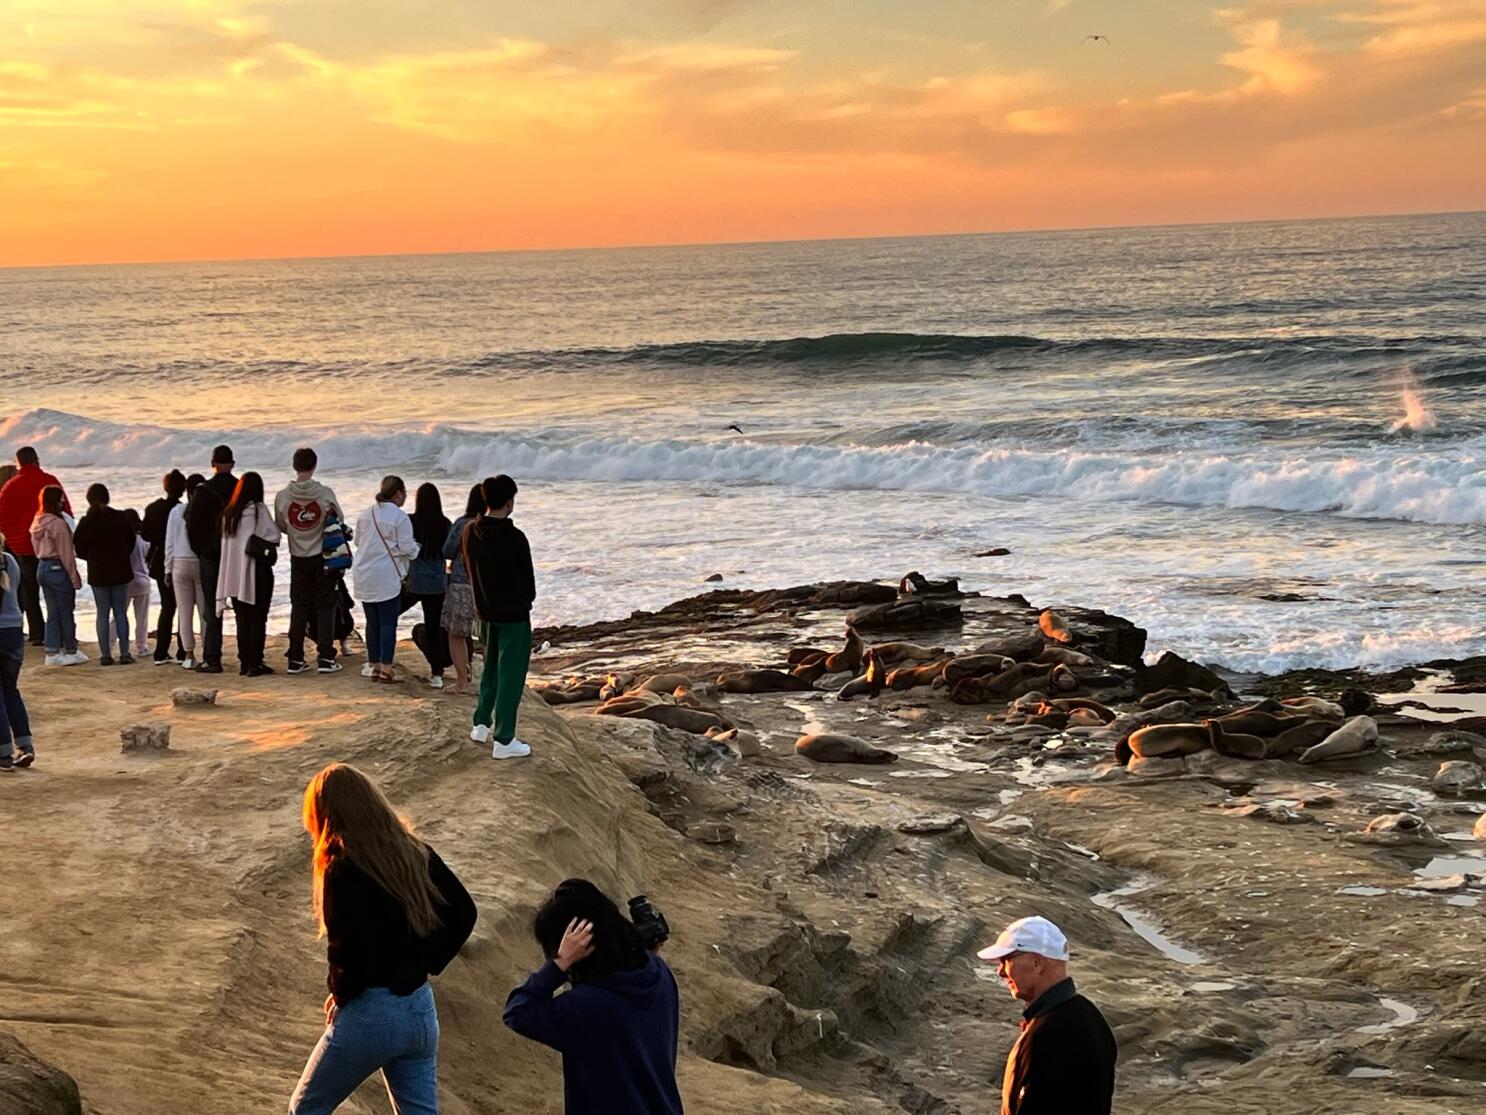 Boomer, Point La Jolla Beaches To Close Year-Round For Sea Lions